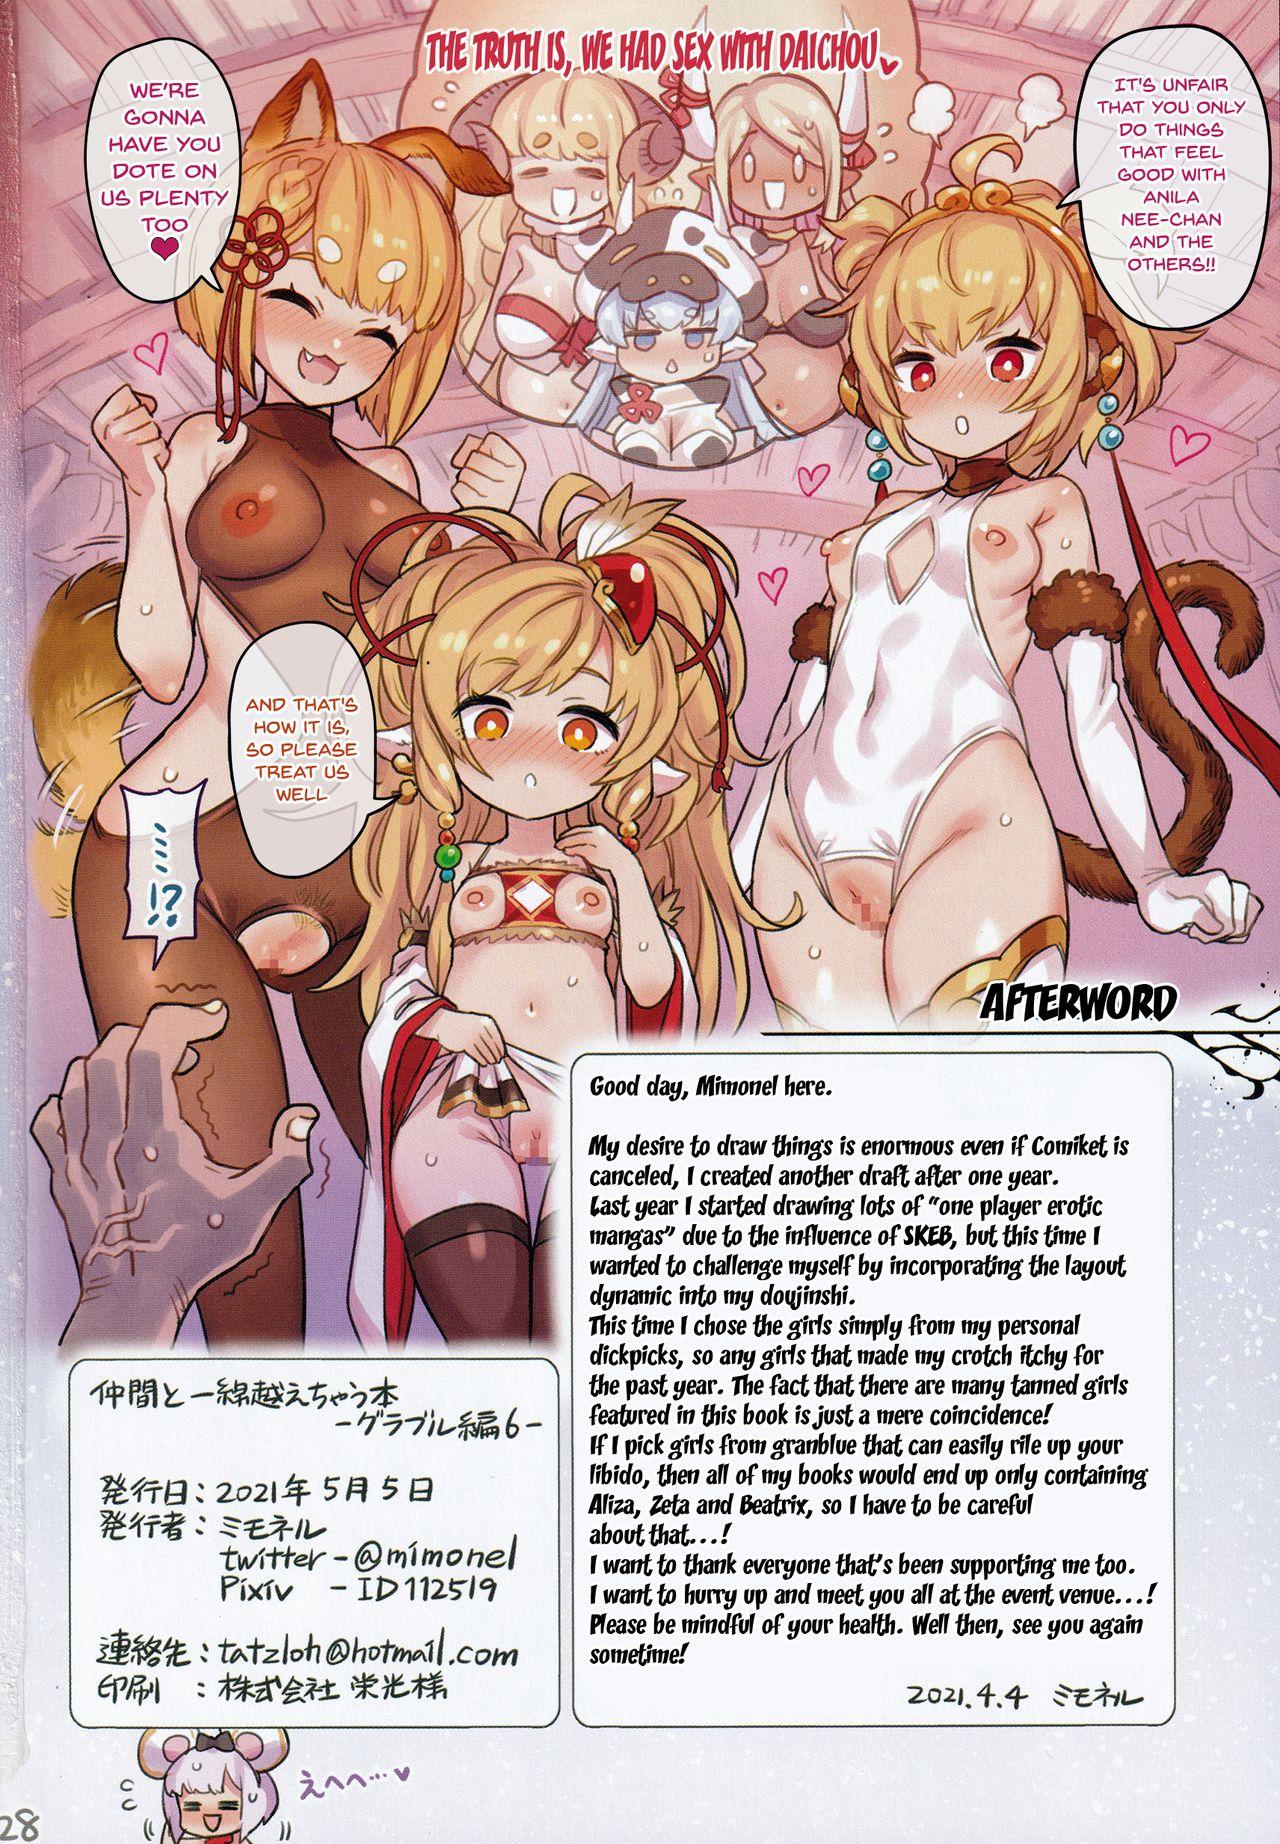 Blow Job Porn (AC3) [Mimoneland (Mimonel)] Nakama to Issen Koechau Hon -Grablu Hen 6- | A Book About Crossing The Line With Your Friends ~GranBlue Book 6~ (Granblue Fantasy) [English] {Doujins.com} - Granblue fantasy Money Talks - Page 26